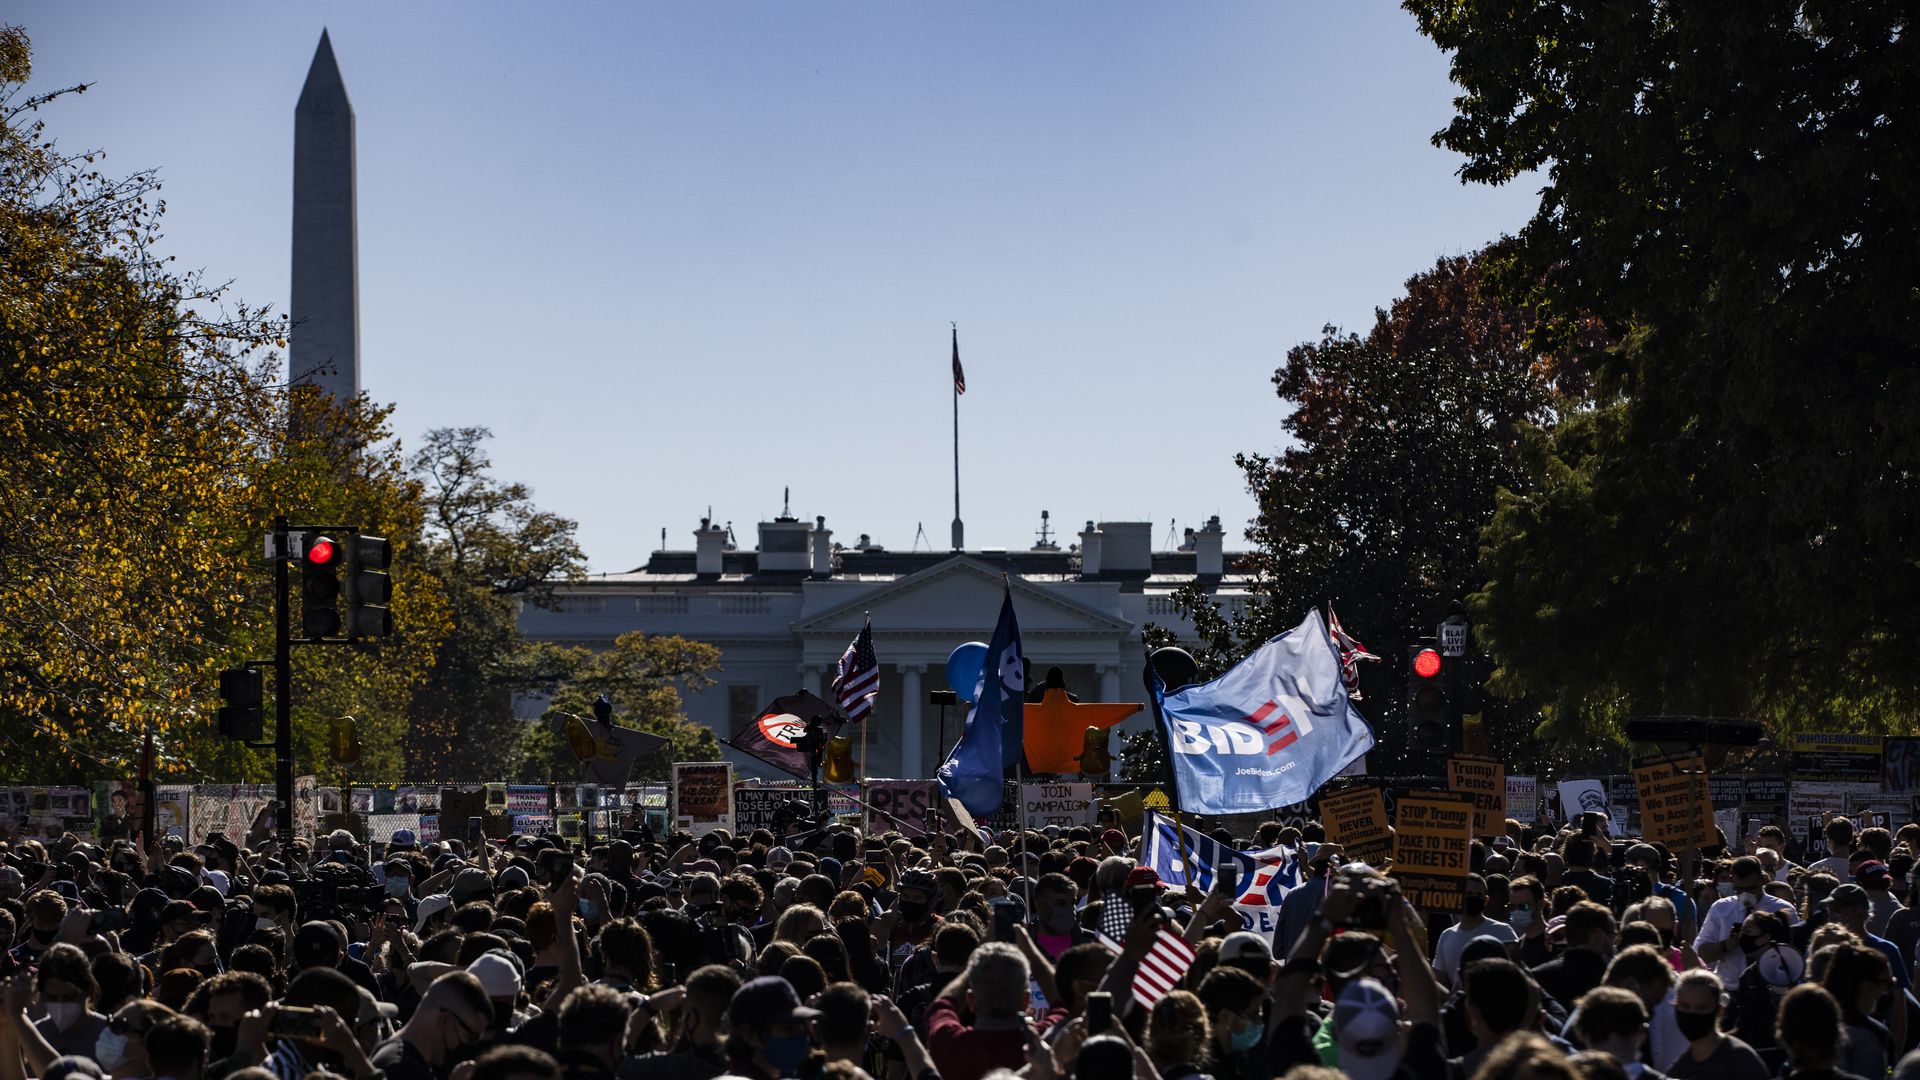 Crowds gather in front of the White House to celebrate Joe Biden's victory